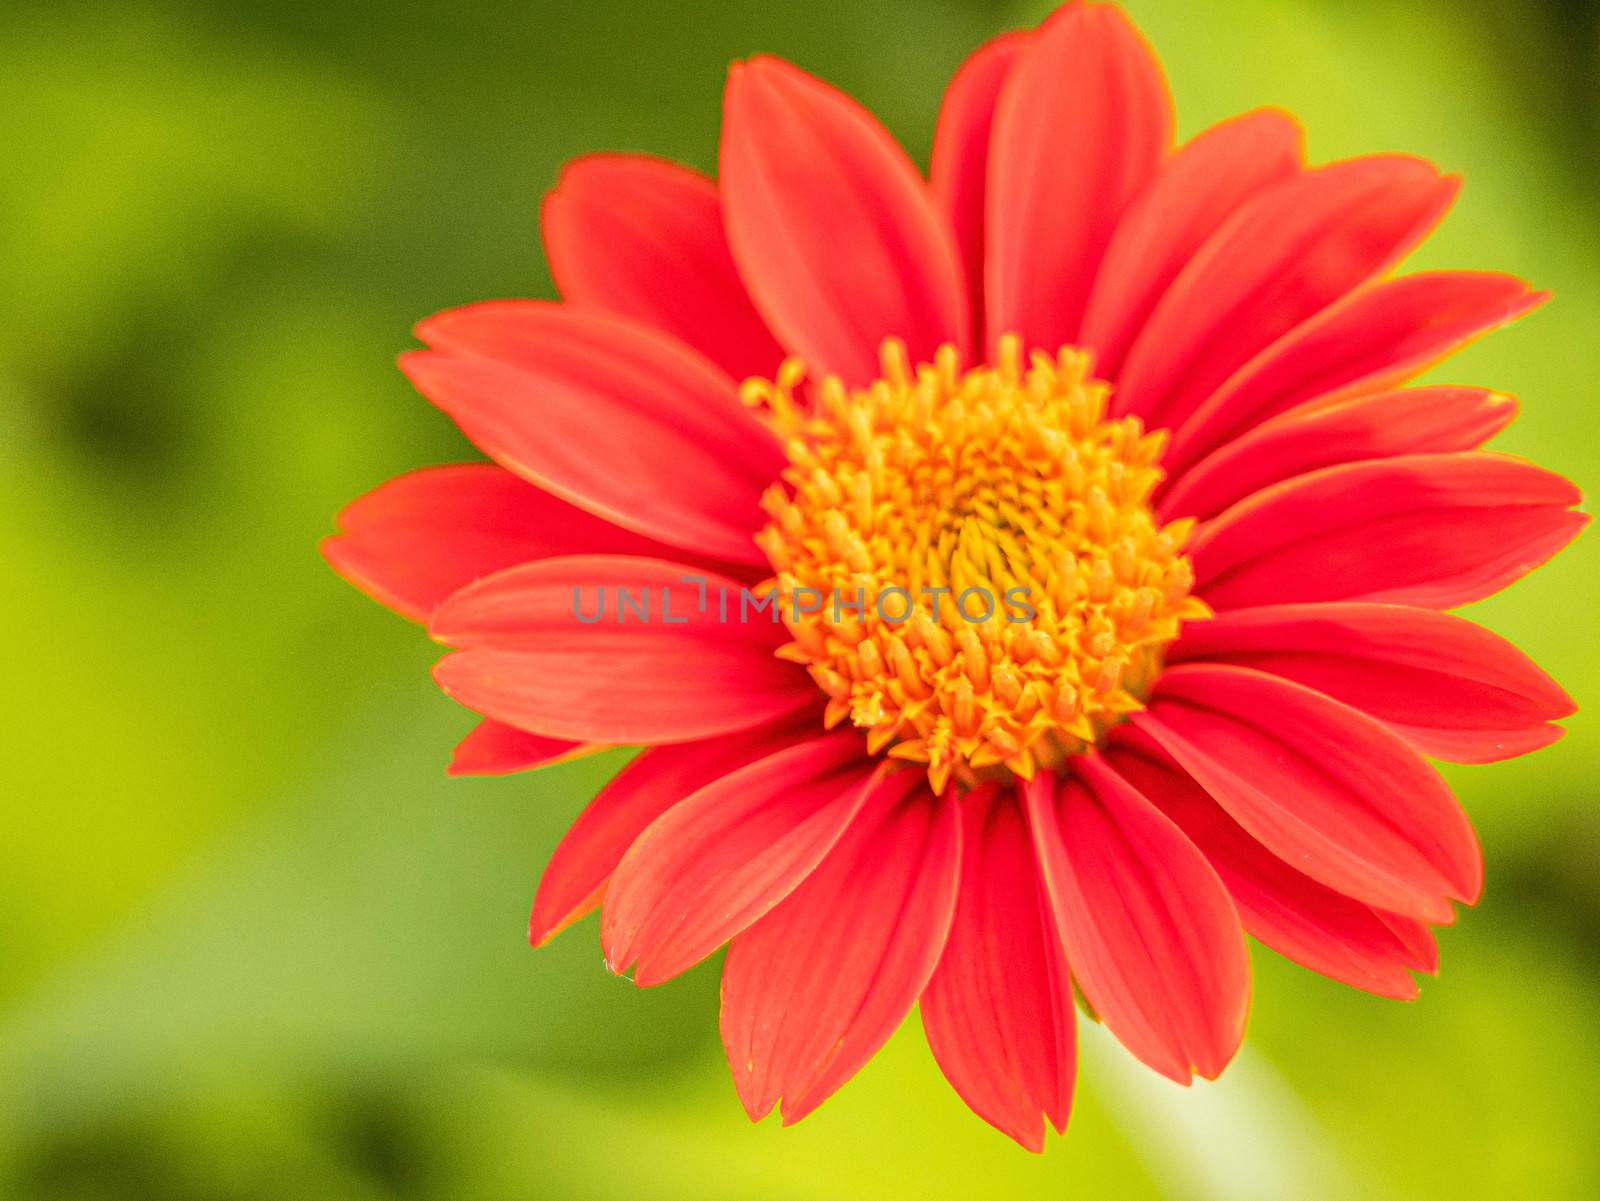 Red Mexican sunflower (Tithonia rotundifolia) is a species of flowering plant in the Asteraceae family on nature blurred background. by TEERASAK